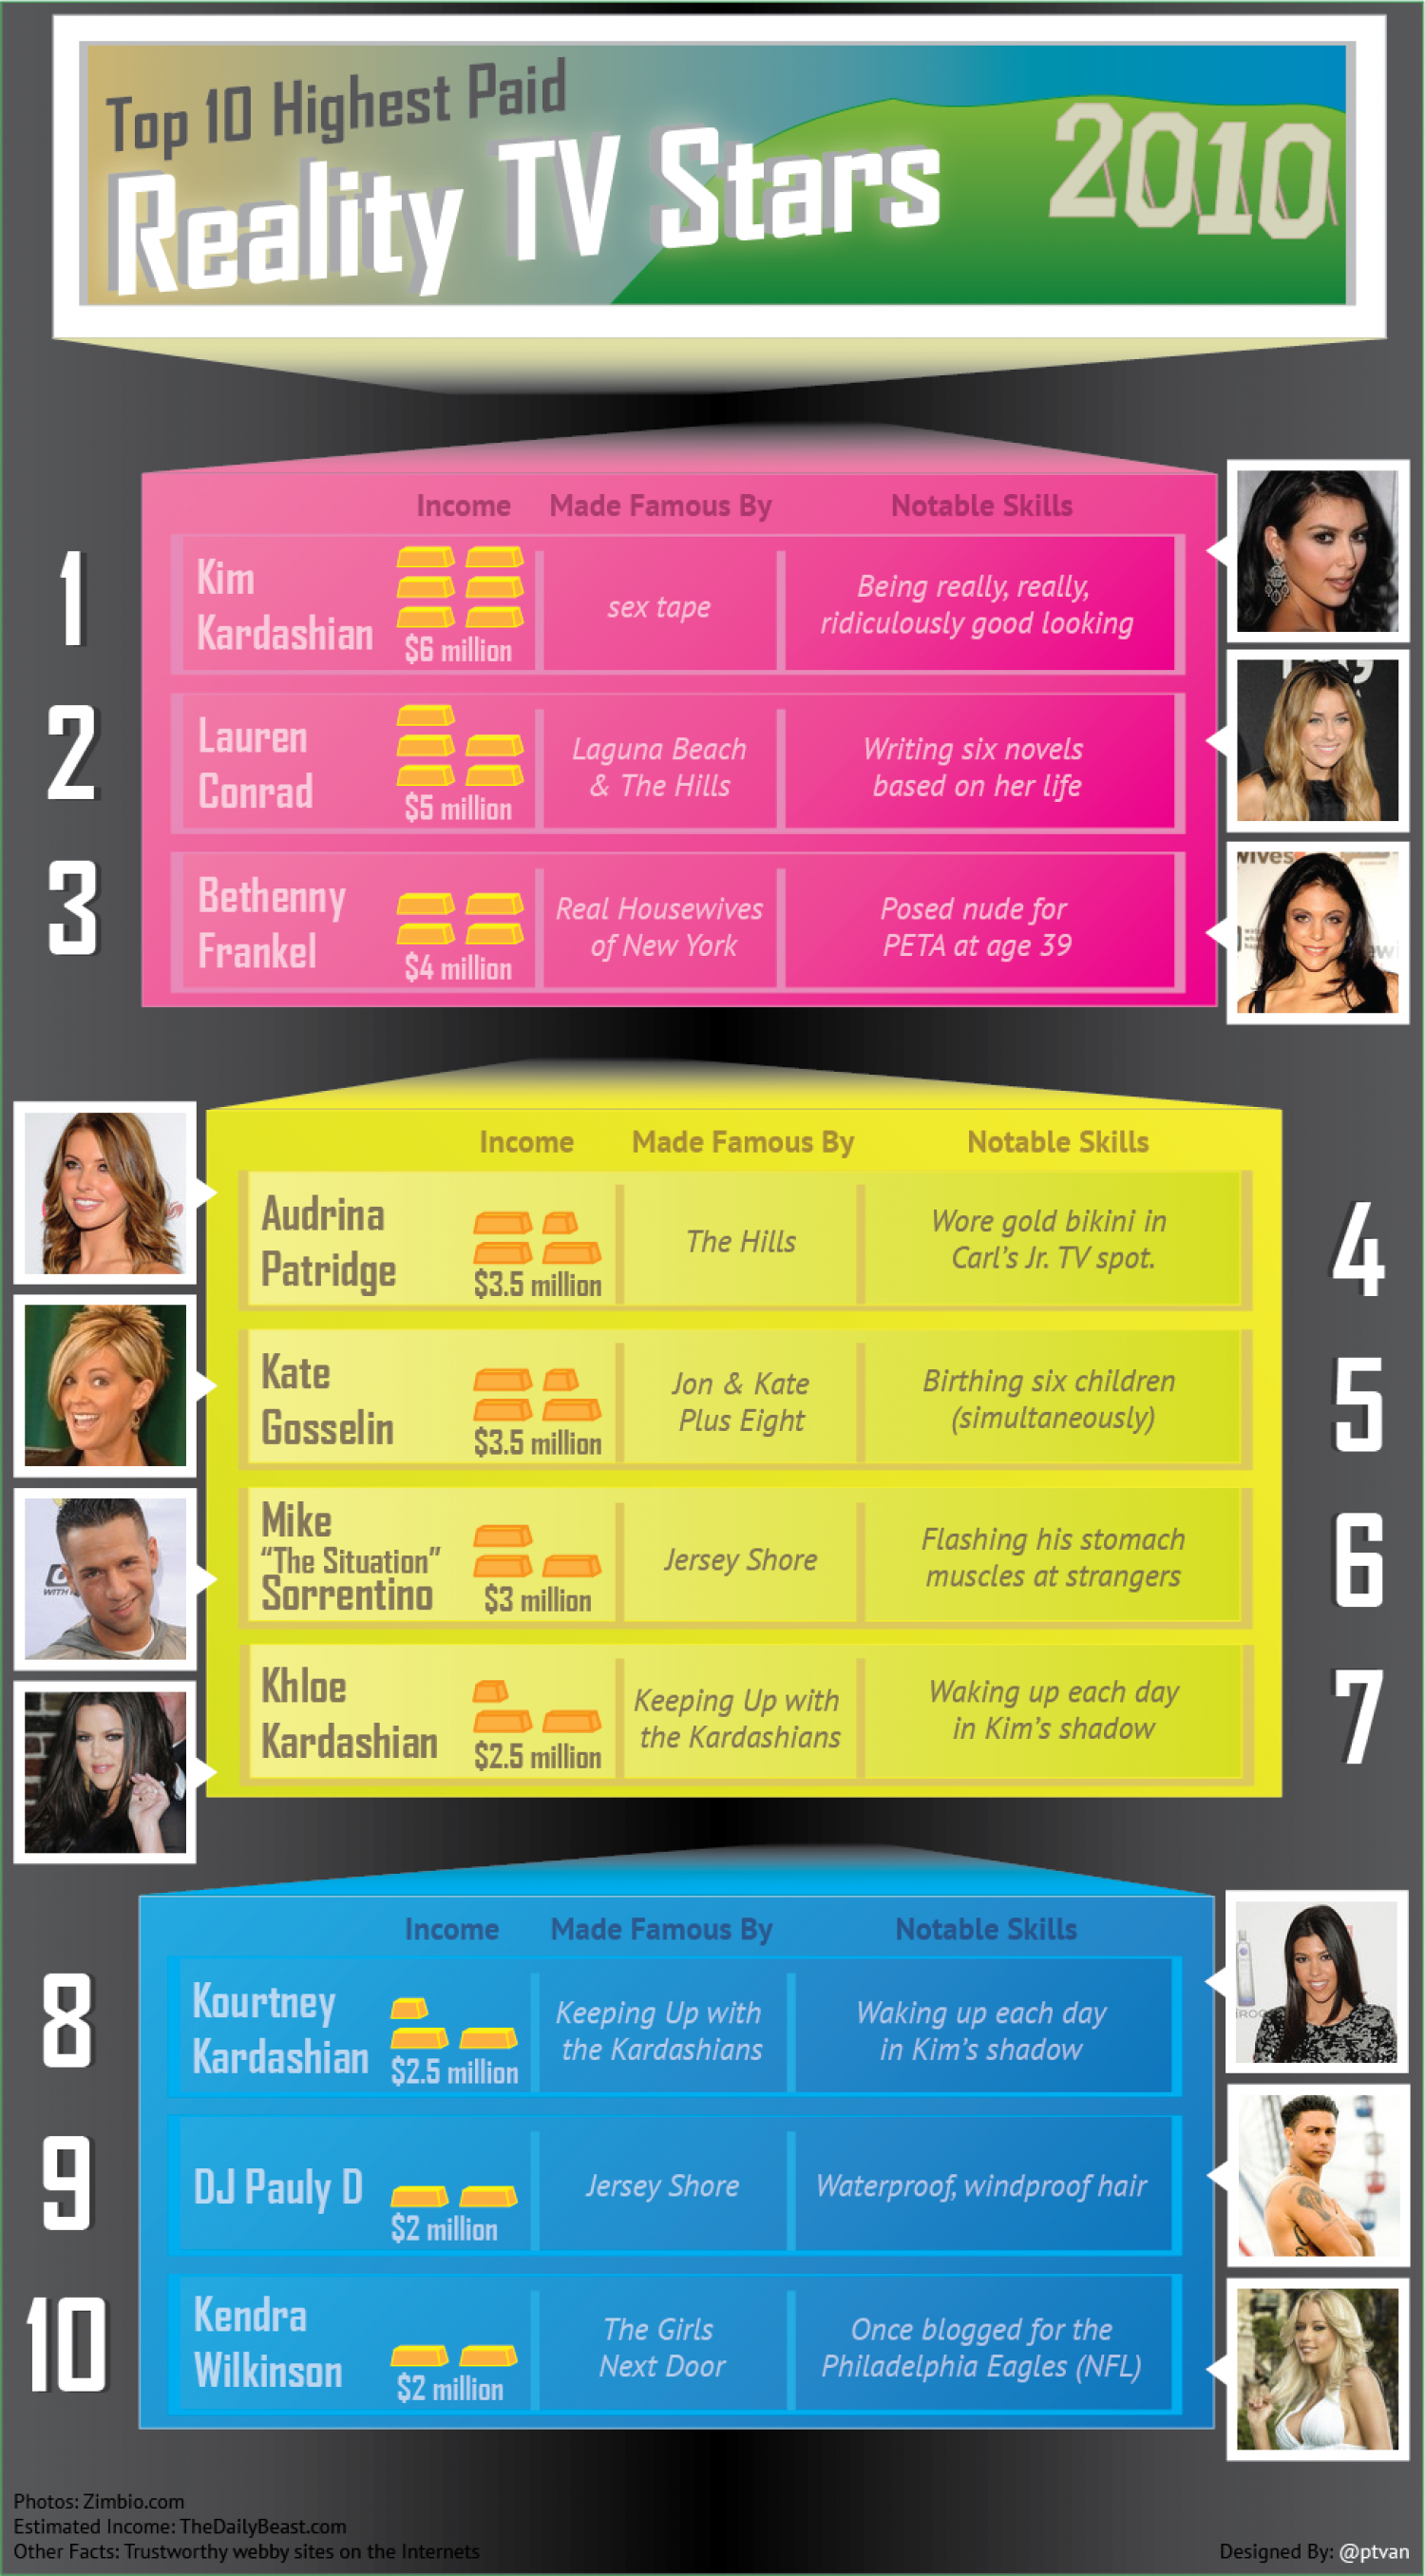 Top 10 Paid Reality TV Stars of 2010 Infographic